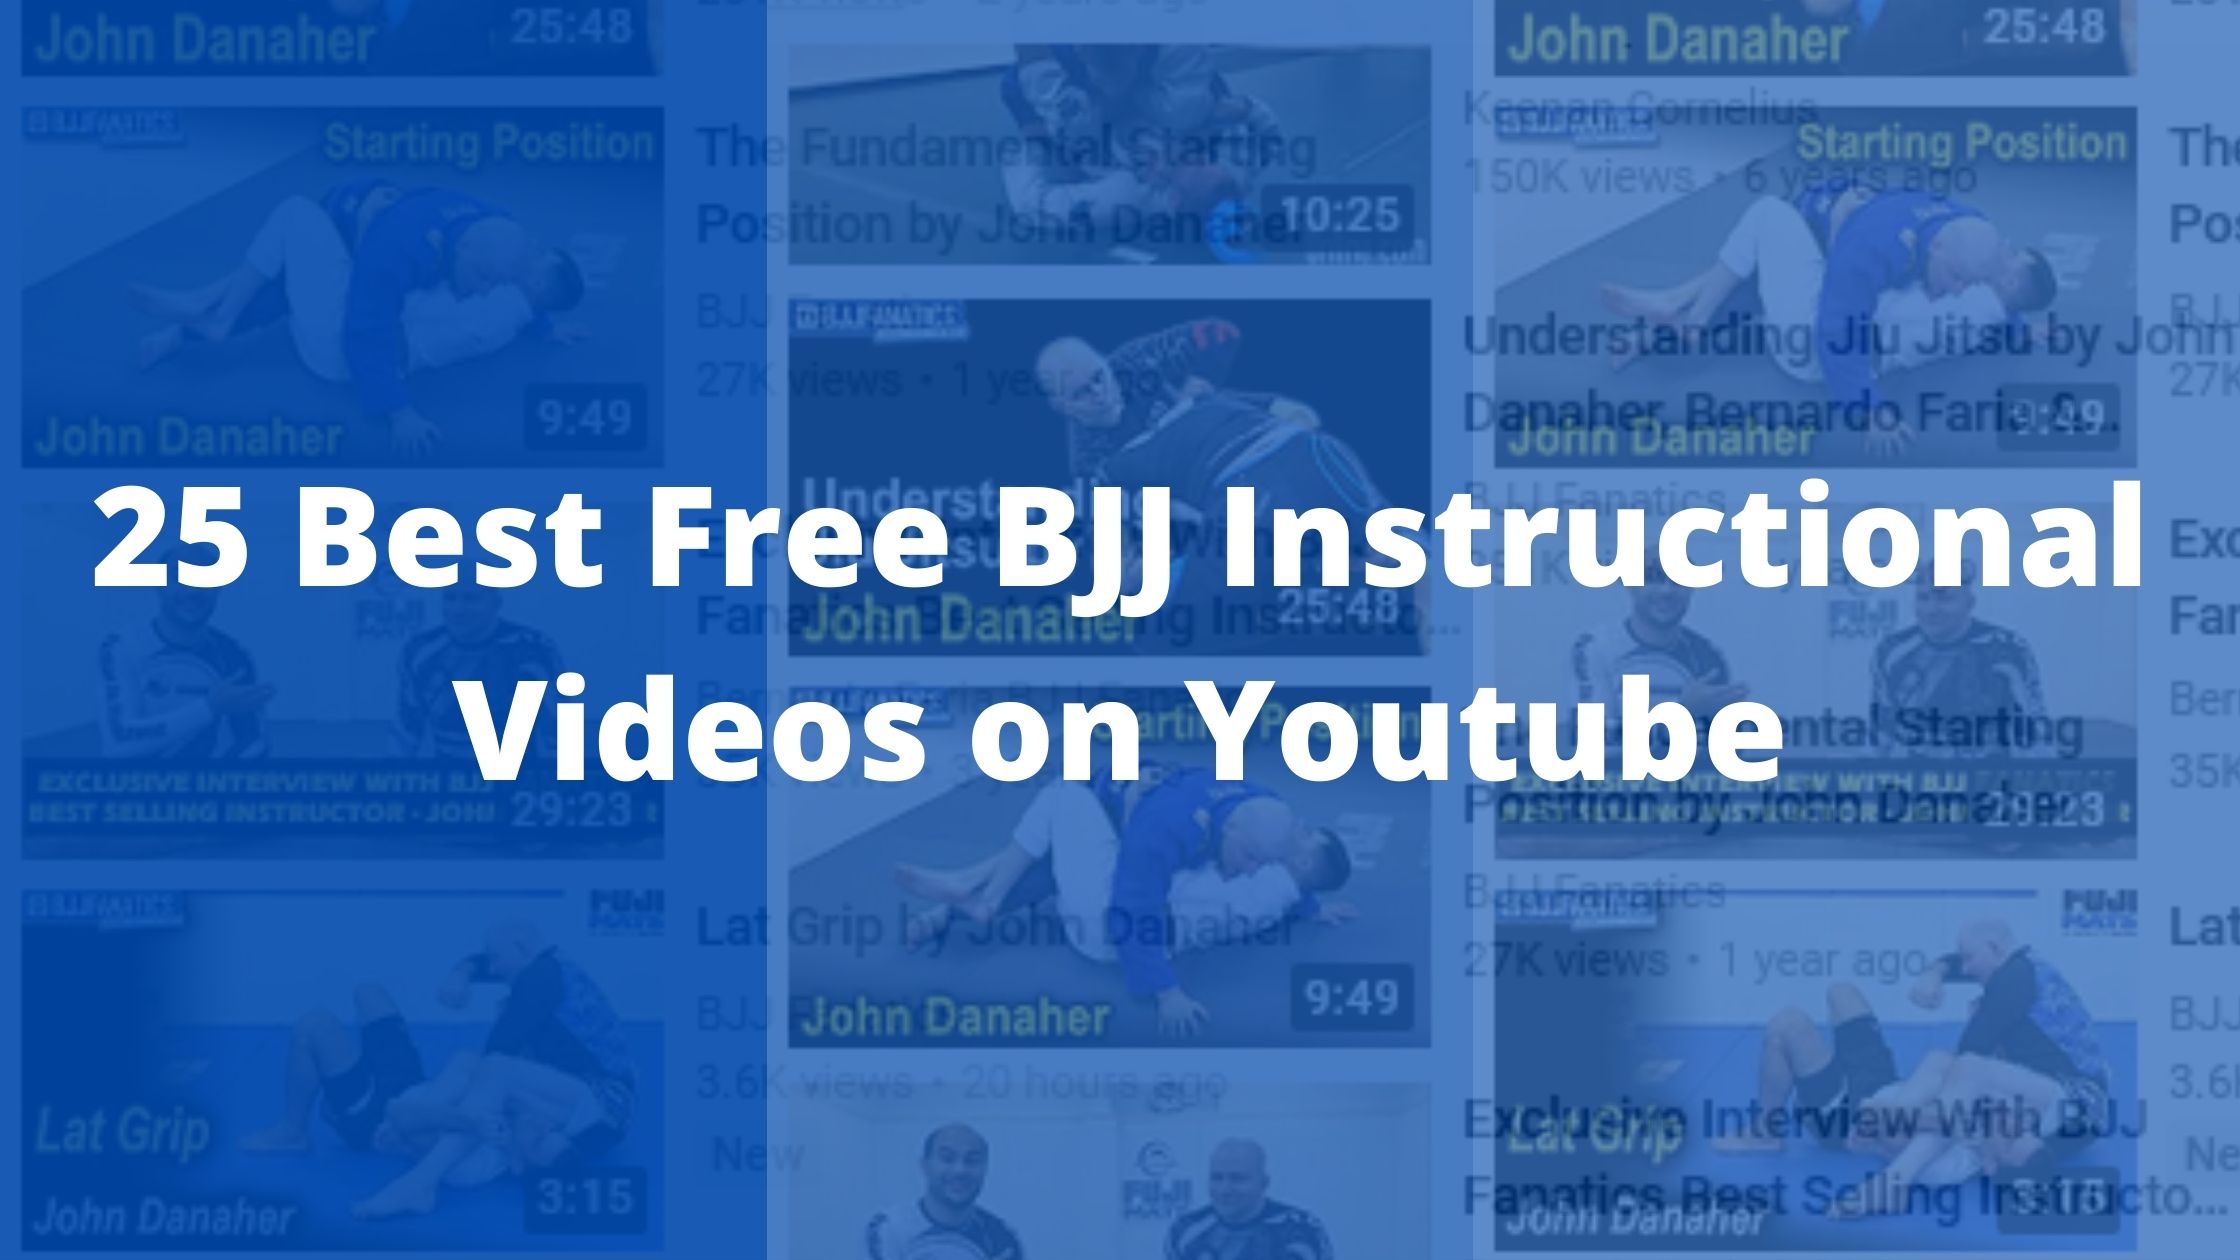 Free BJJ Instructional Videos: 25 of the Best Youtube Instructional Videos